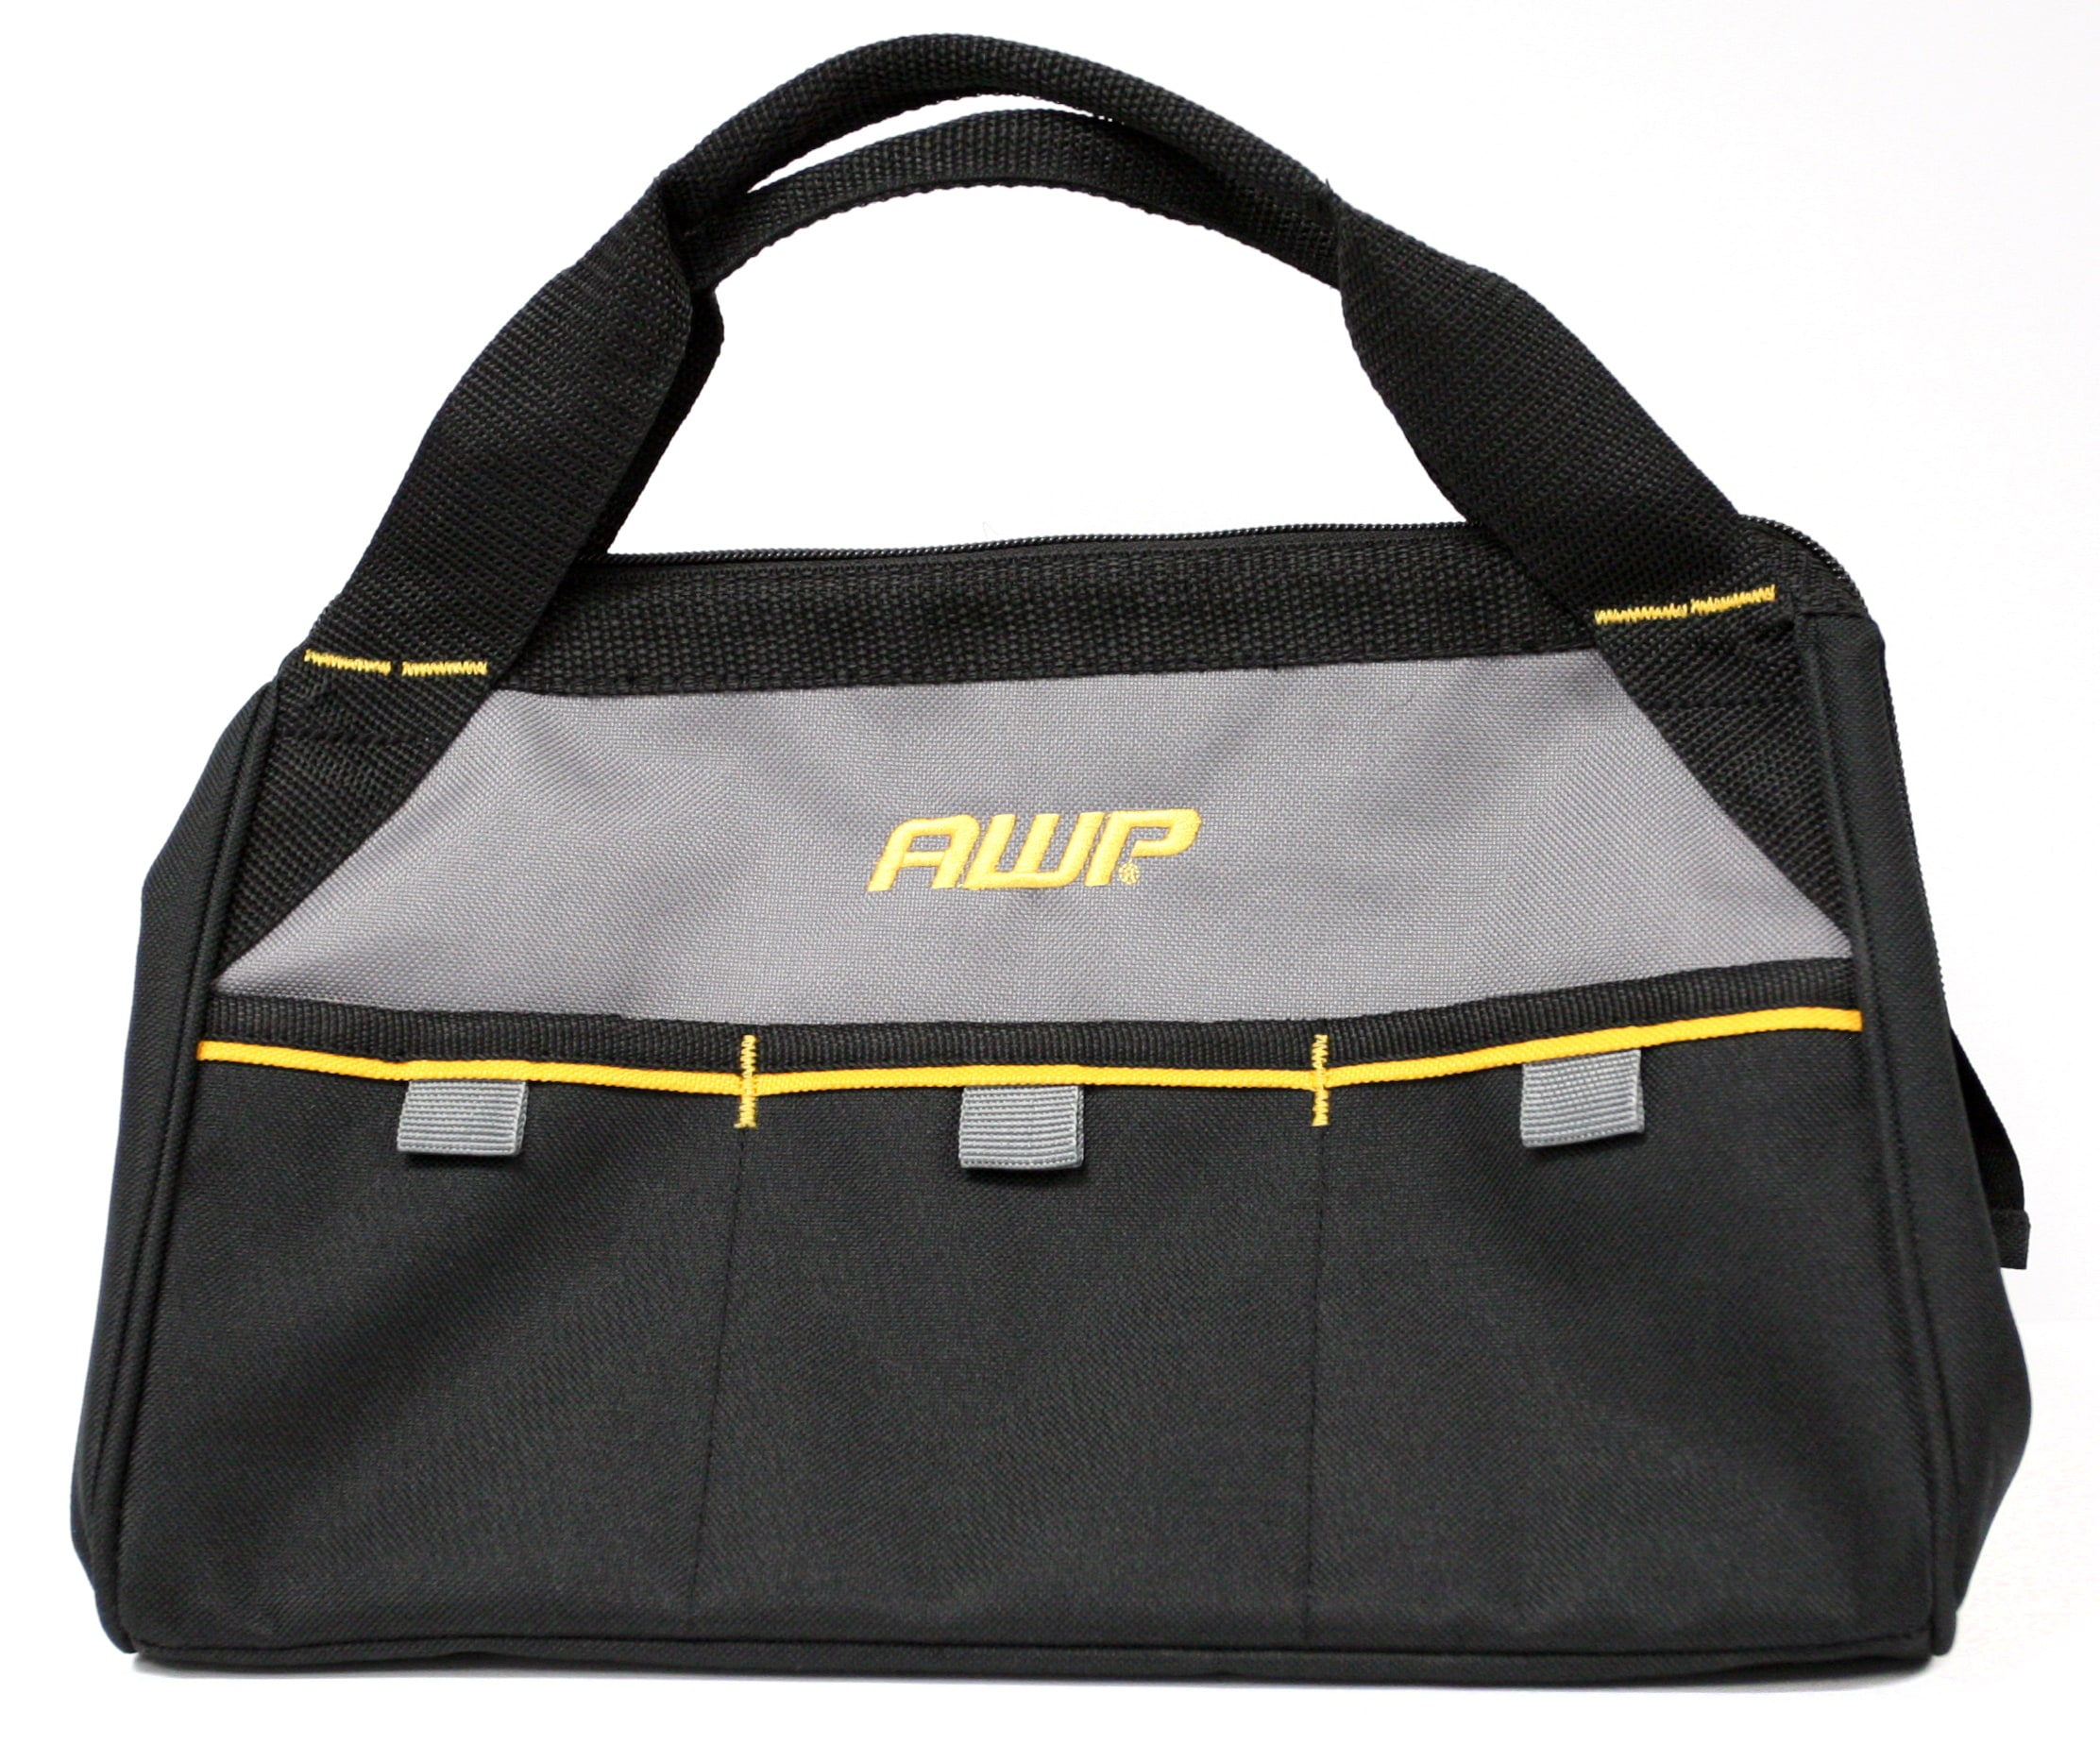 AWP Black/Gray/Yellow Polyester 13-in Zippered Tool Bag in the